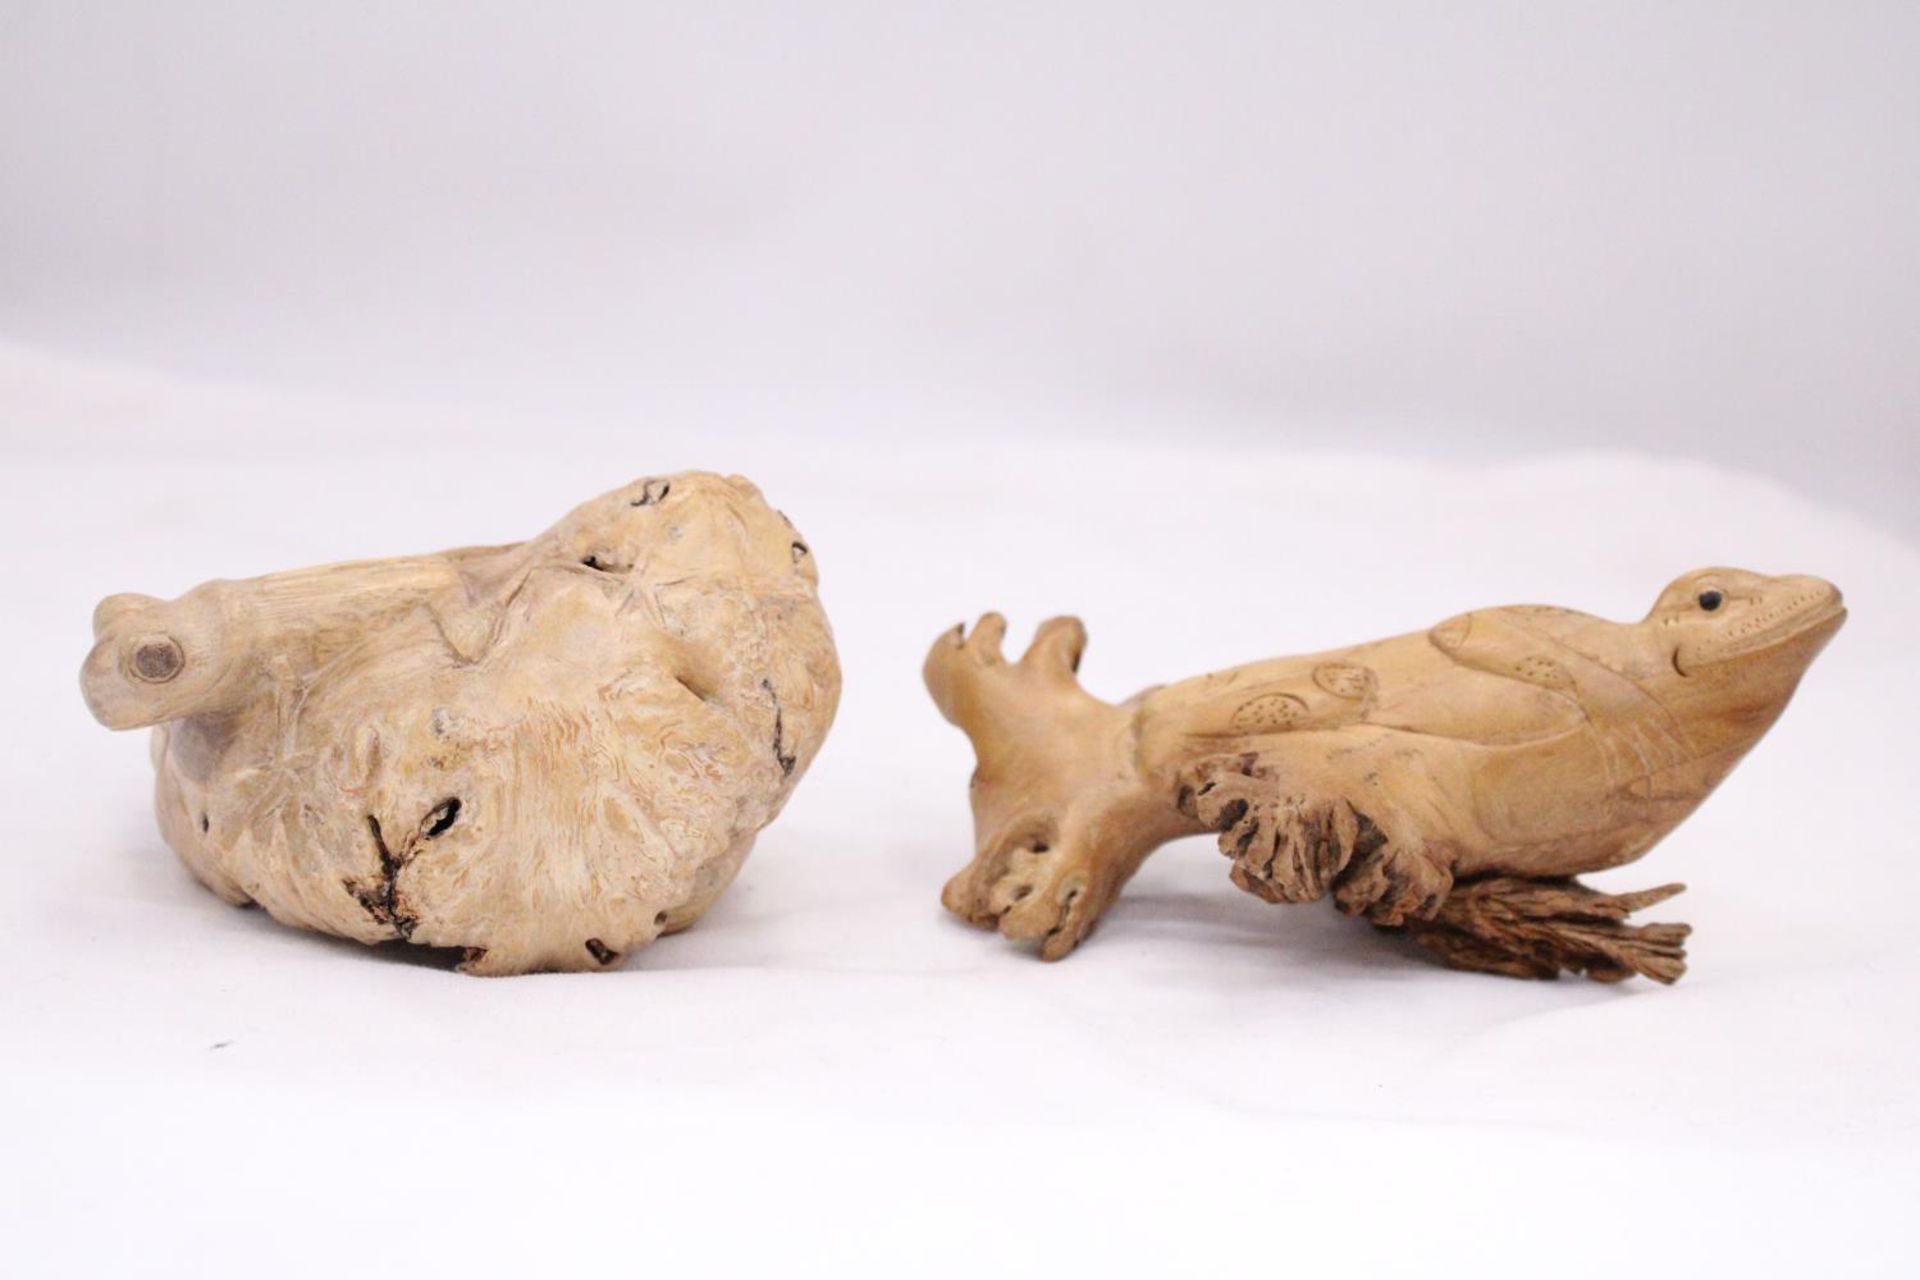 A VINTAGE CARVED DRIFTWOOD WOOD FROG AND LIZARD - Image 6 of 7